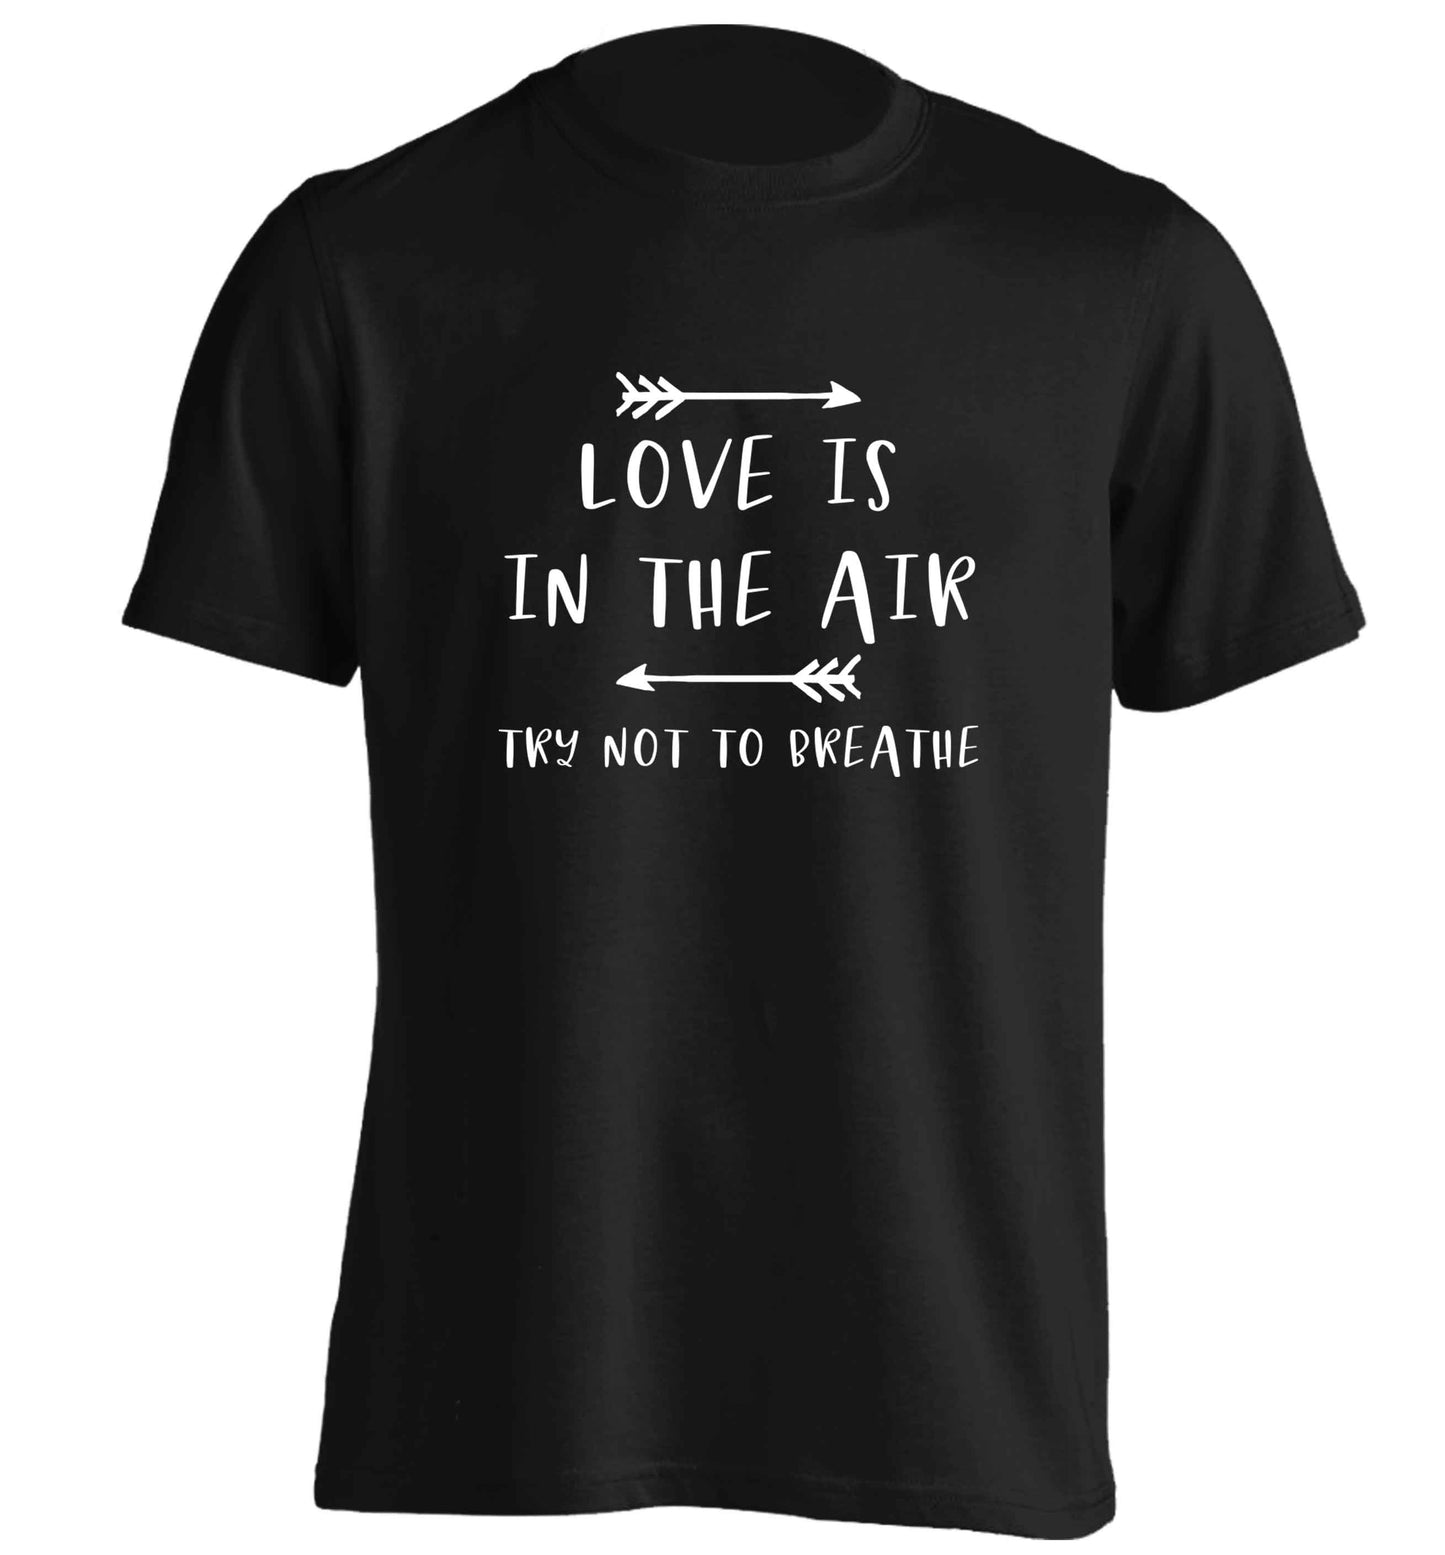 Love is in the air try not to breathe adults unisex black Tshirt 2XL